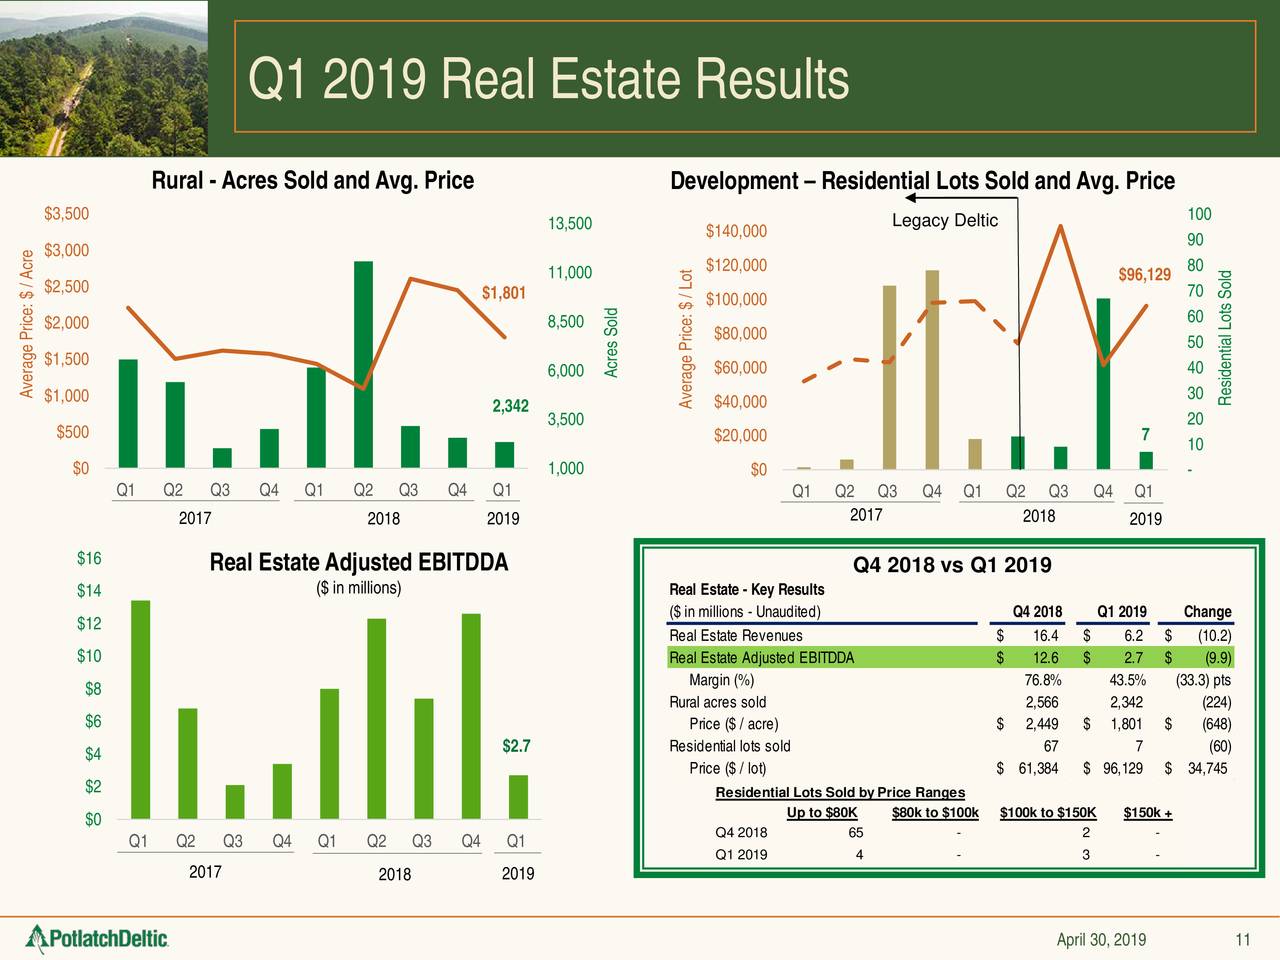 Q1 2019 Real Estate Results